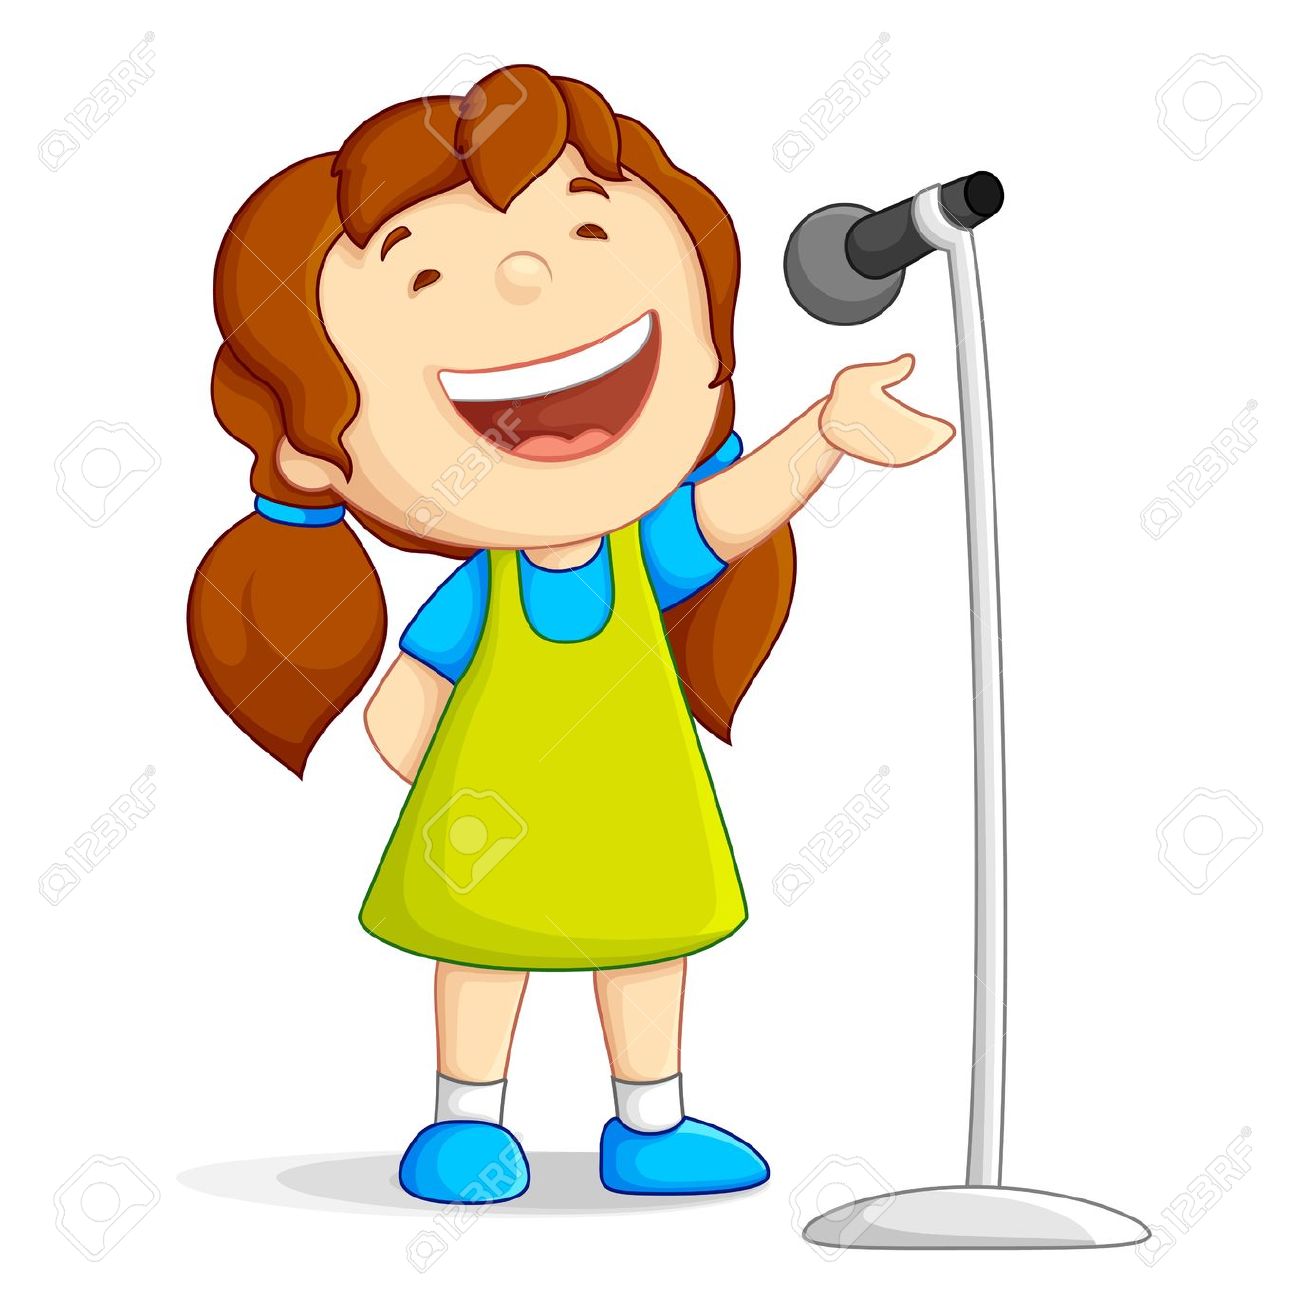 Download Free Singers Clipart